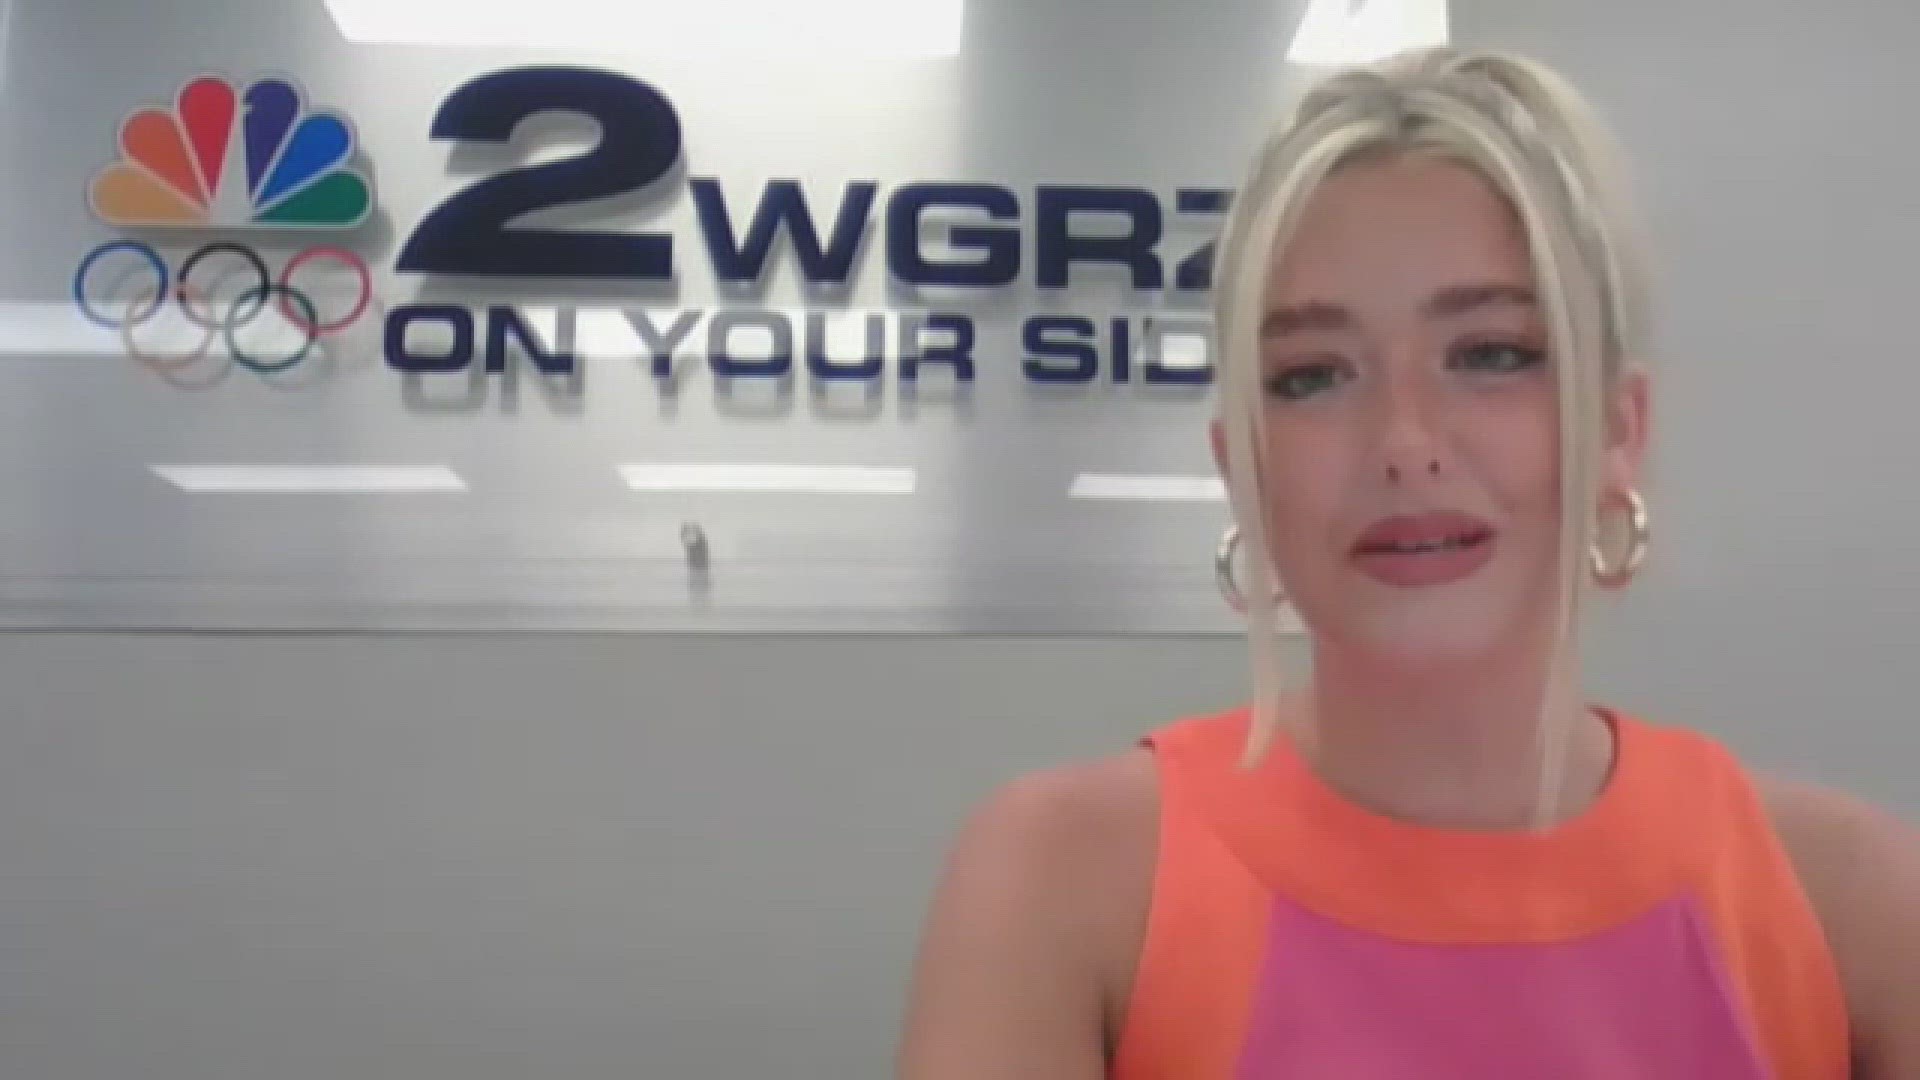 Channel 2 sports reporter Lindsey Moppert and WGRZ Bills/NFL Insider Vic Carucci sit down to talk Bills in the WGRZ+ exclusive.